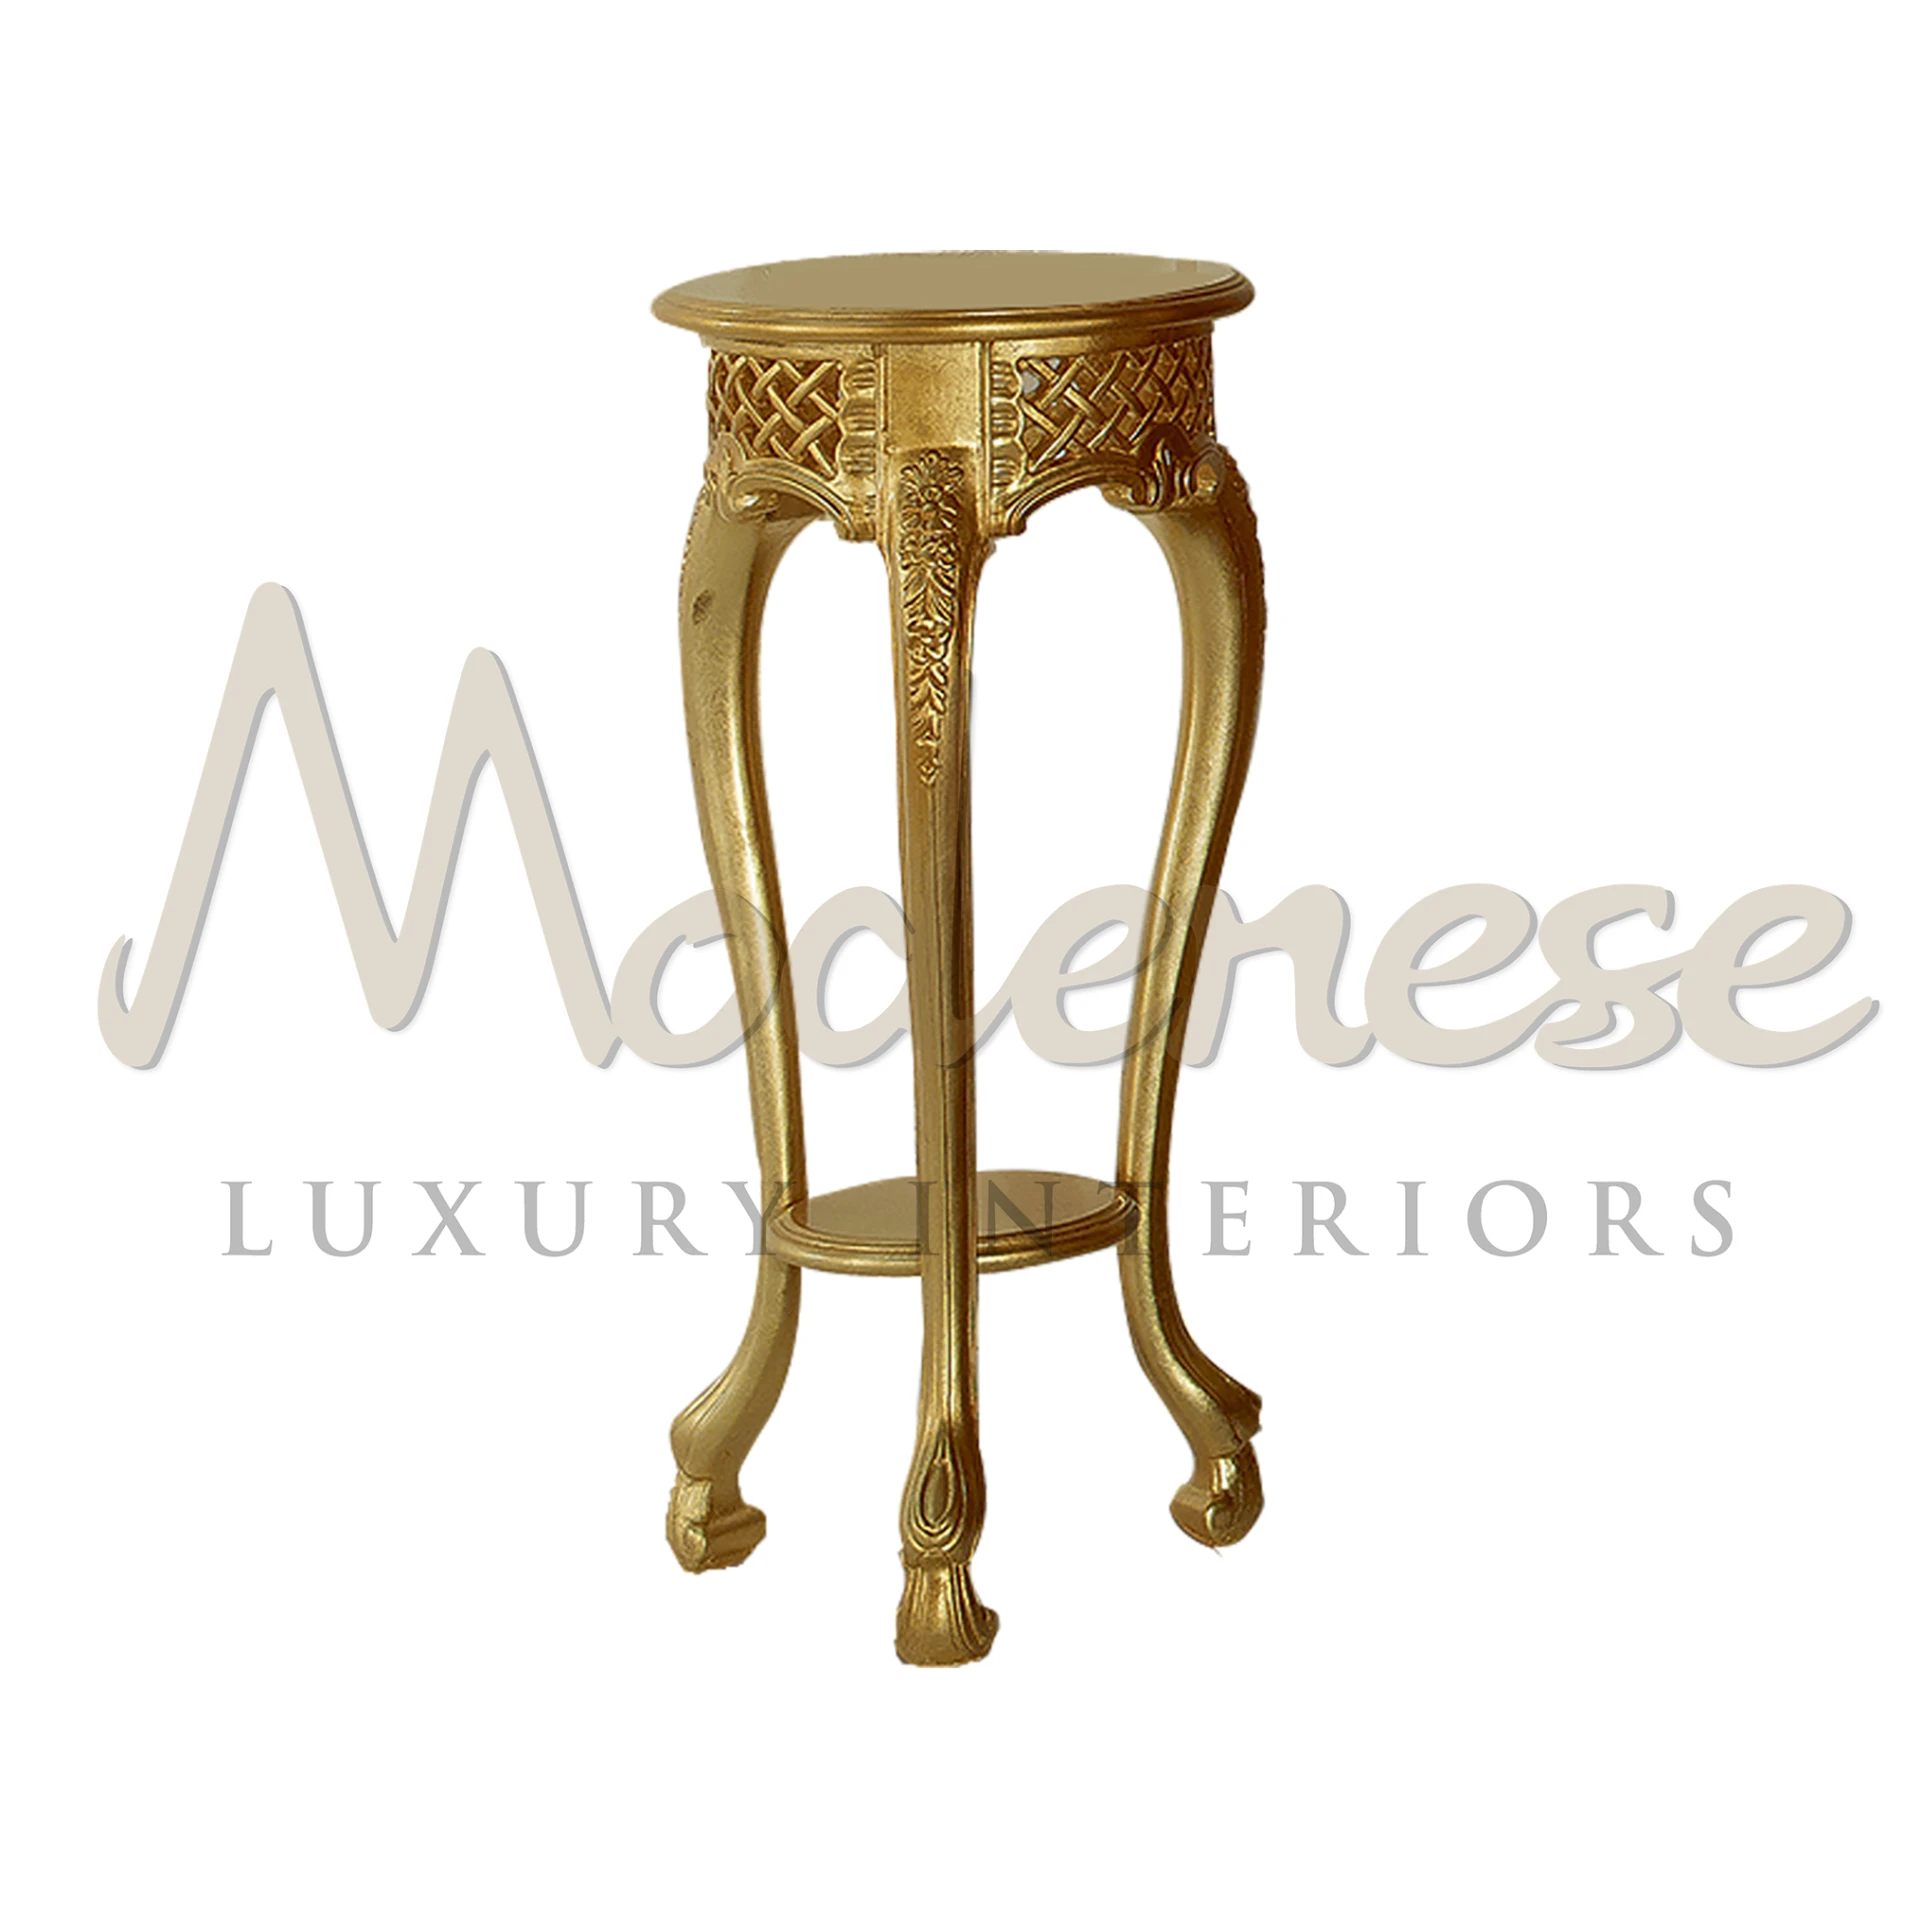 Decorative gold leaf vase stand in classic style, a luxurious addition to any interior design, made of solid wood.